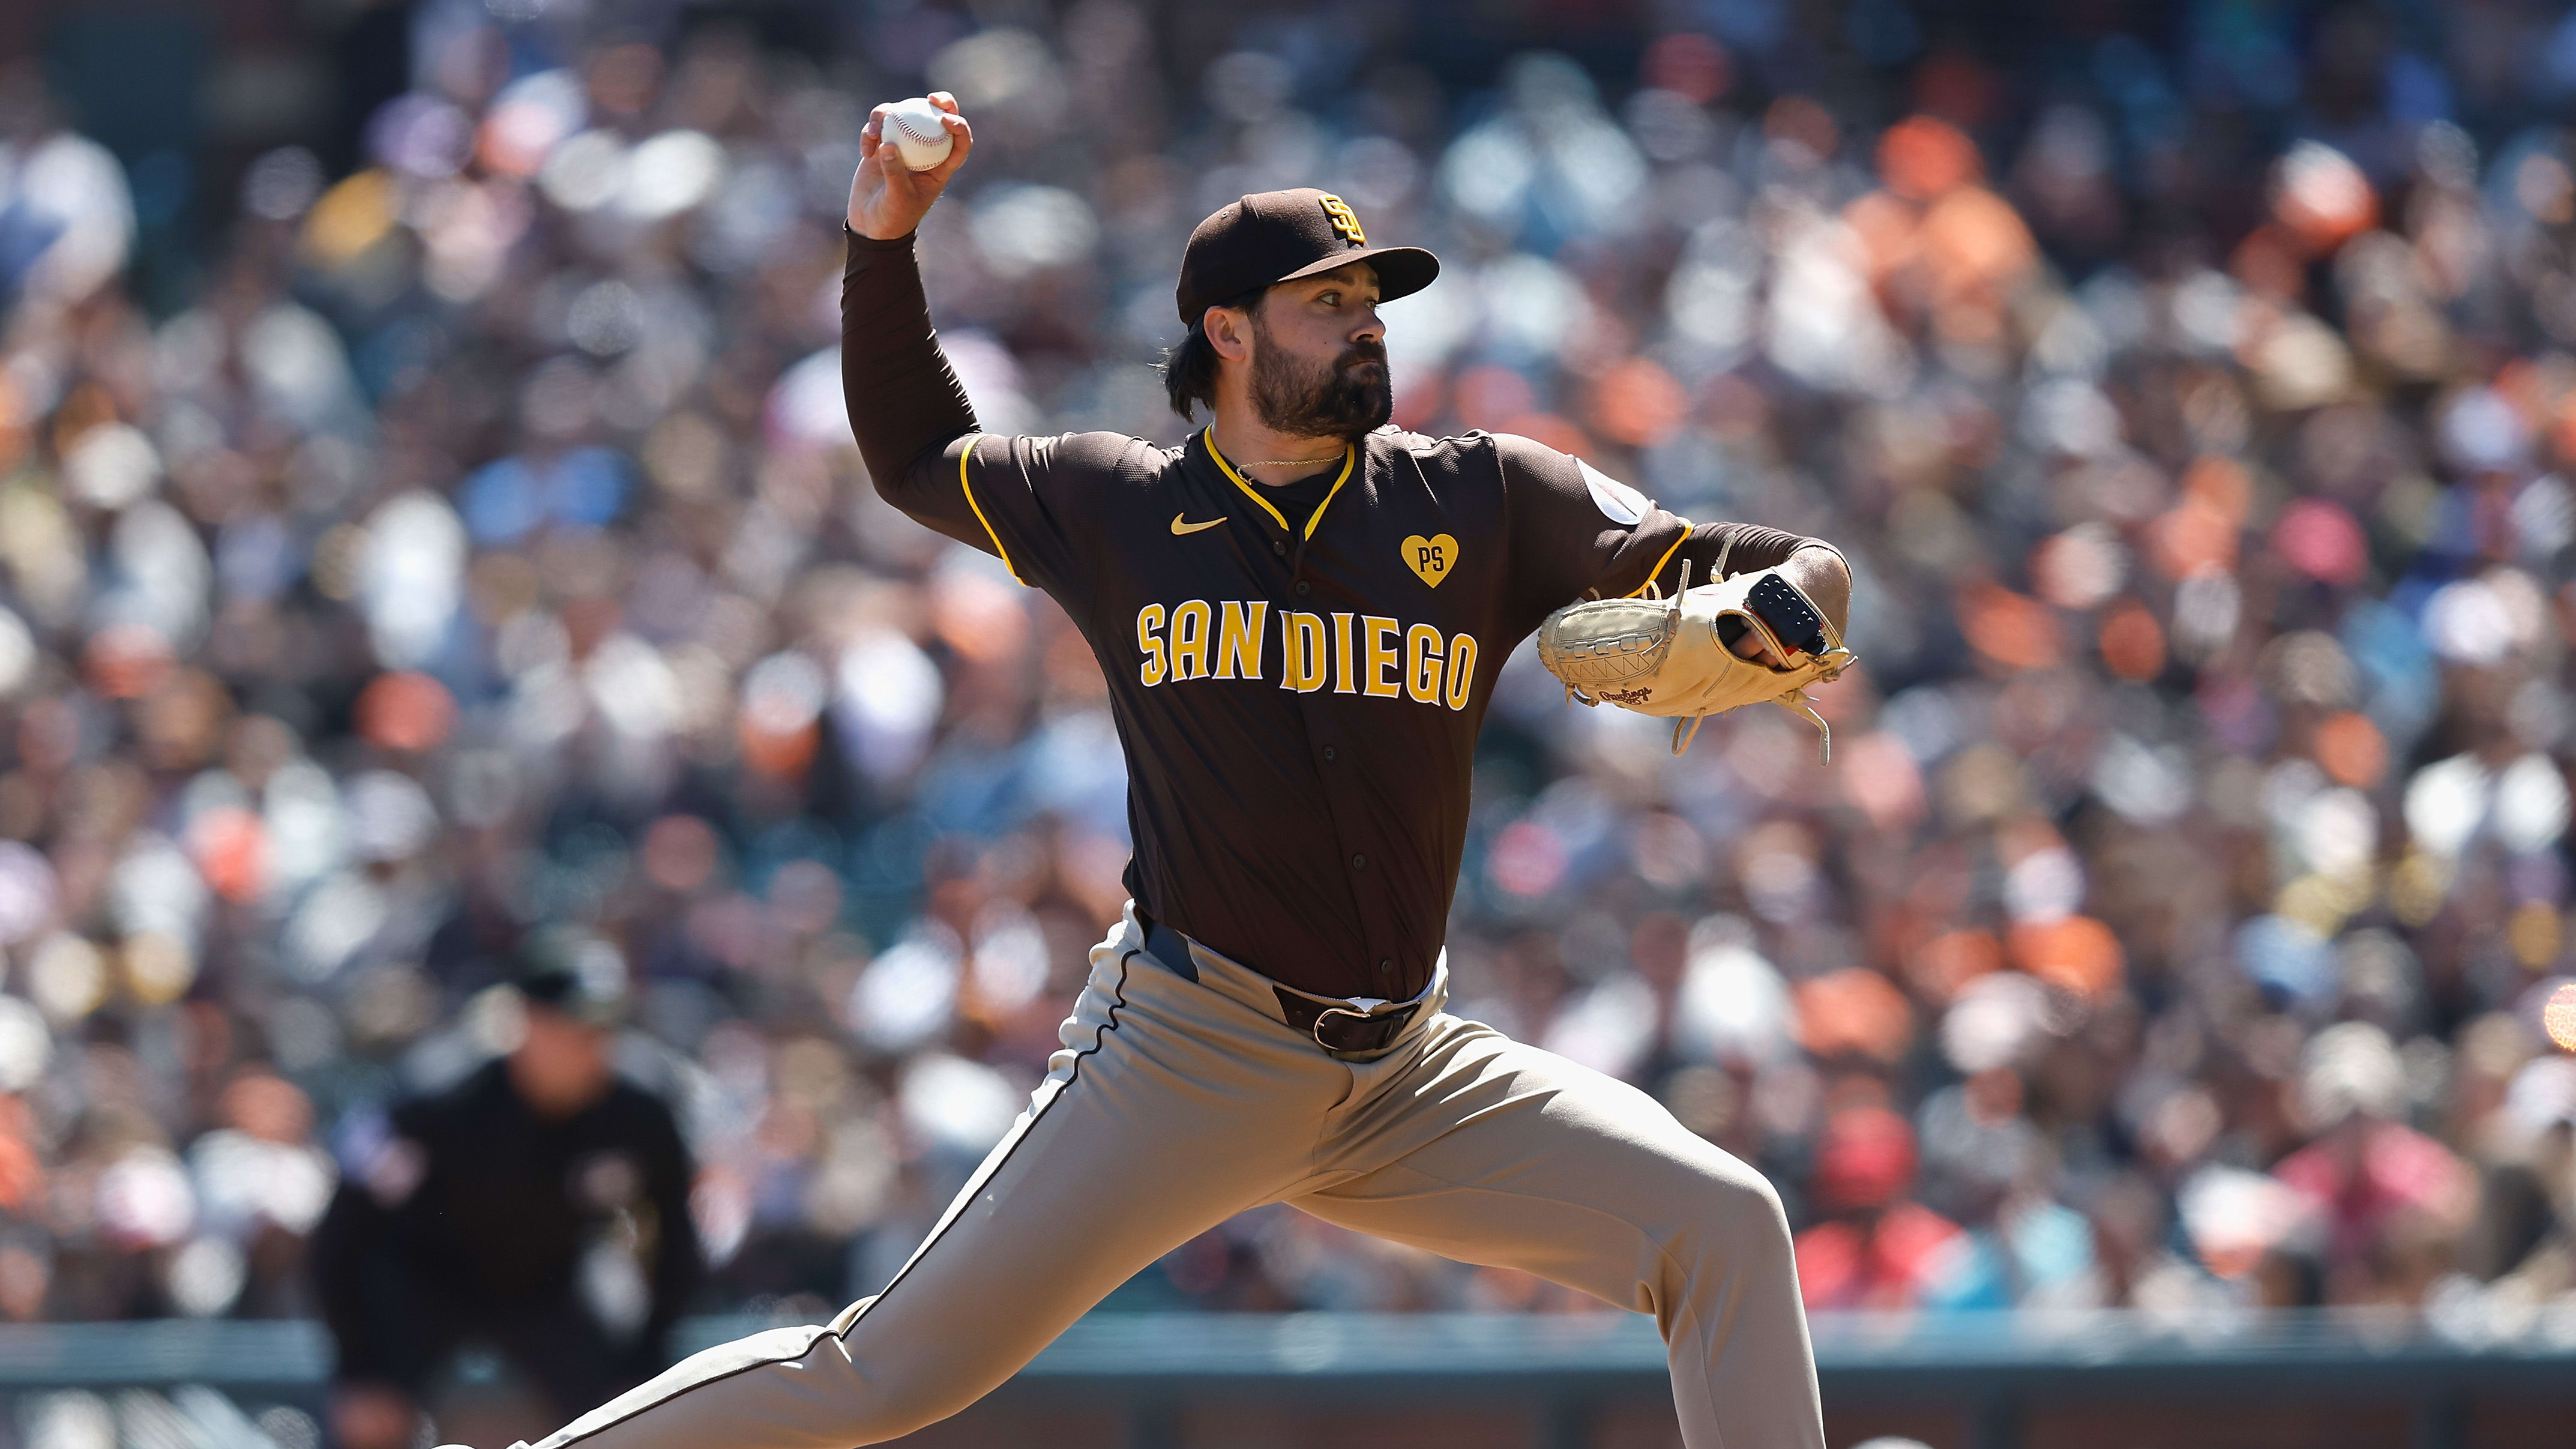 Pitcher Matt Waldron hurled one of the most unique knuckleballs of the Statcast era during Sunday’s Padres-Giants game.